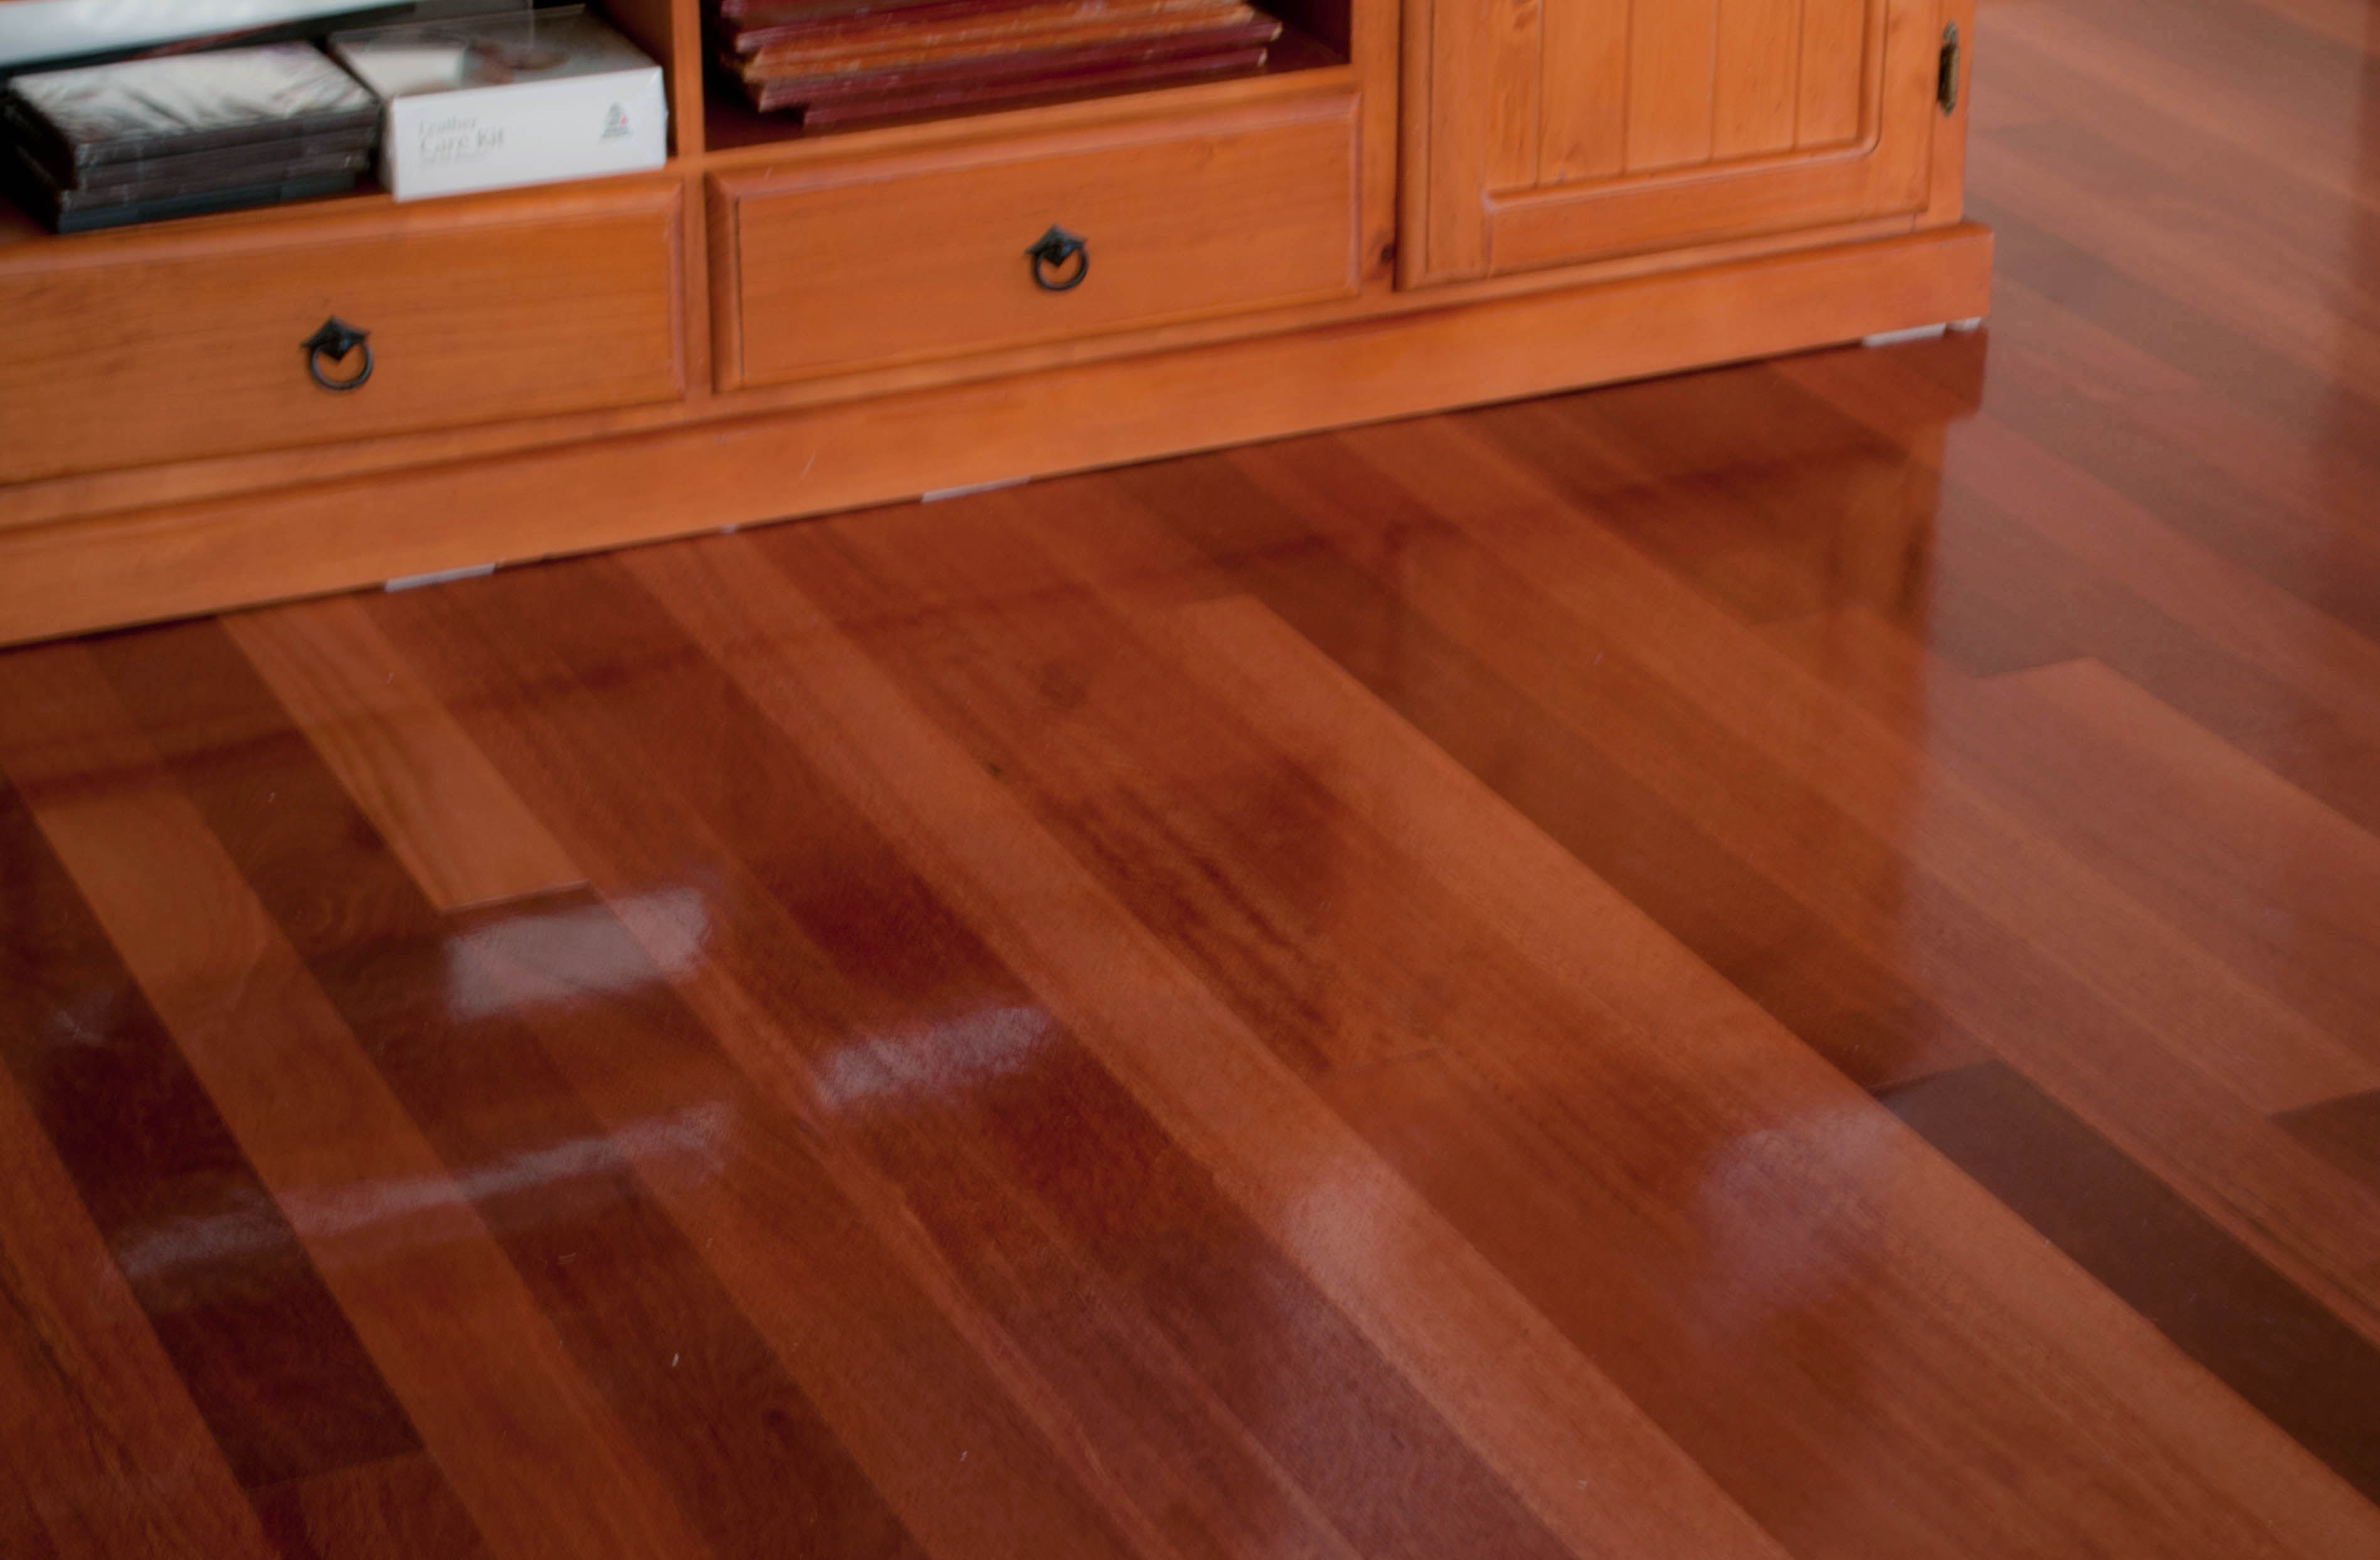 showing a room with a newly laid West Australian Karrie solid timber floor in a house. The floor is an red-orangey color